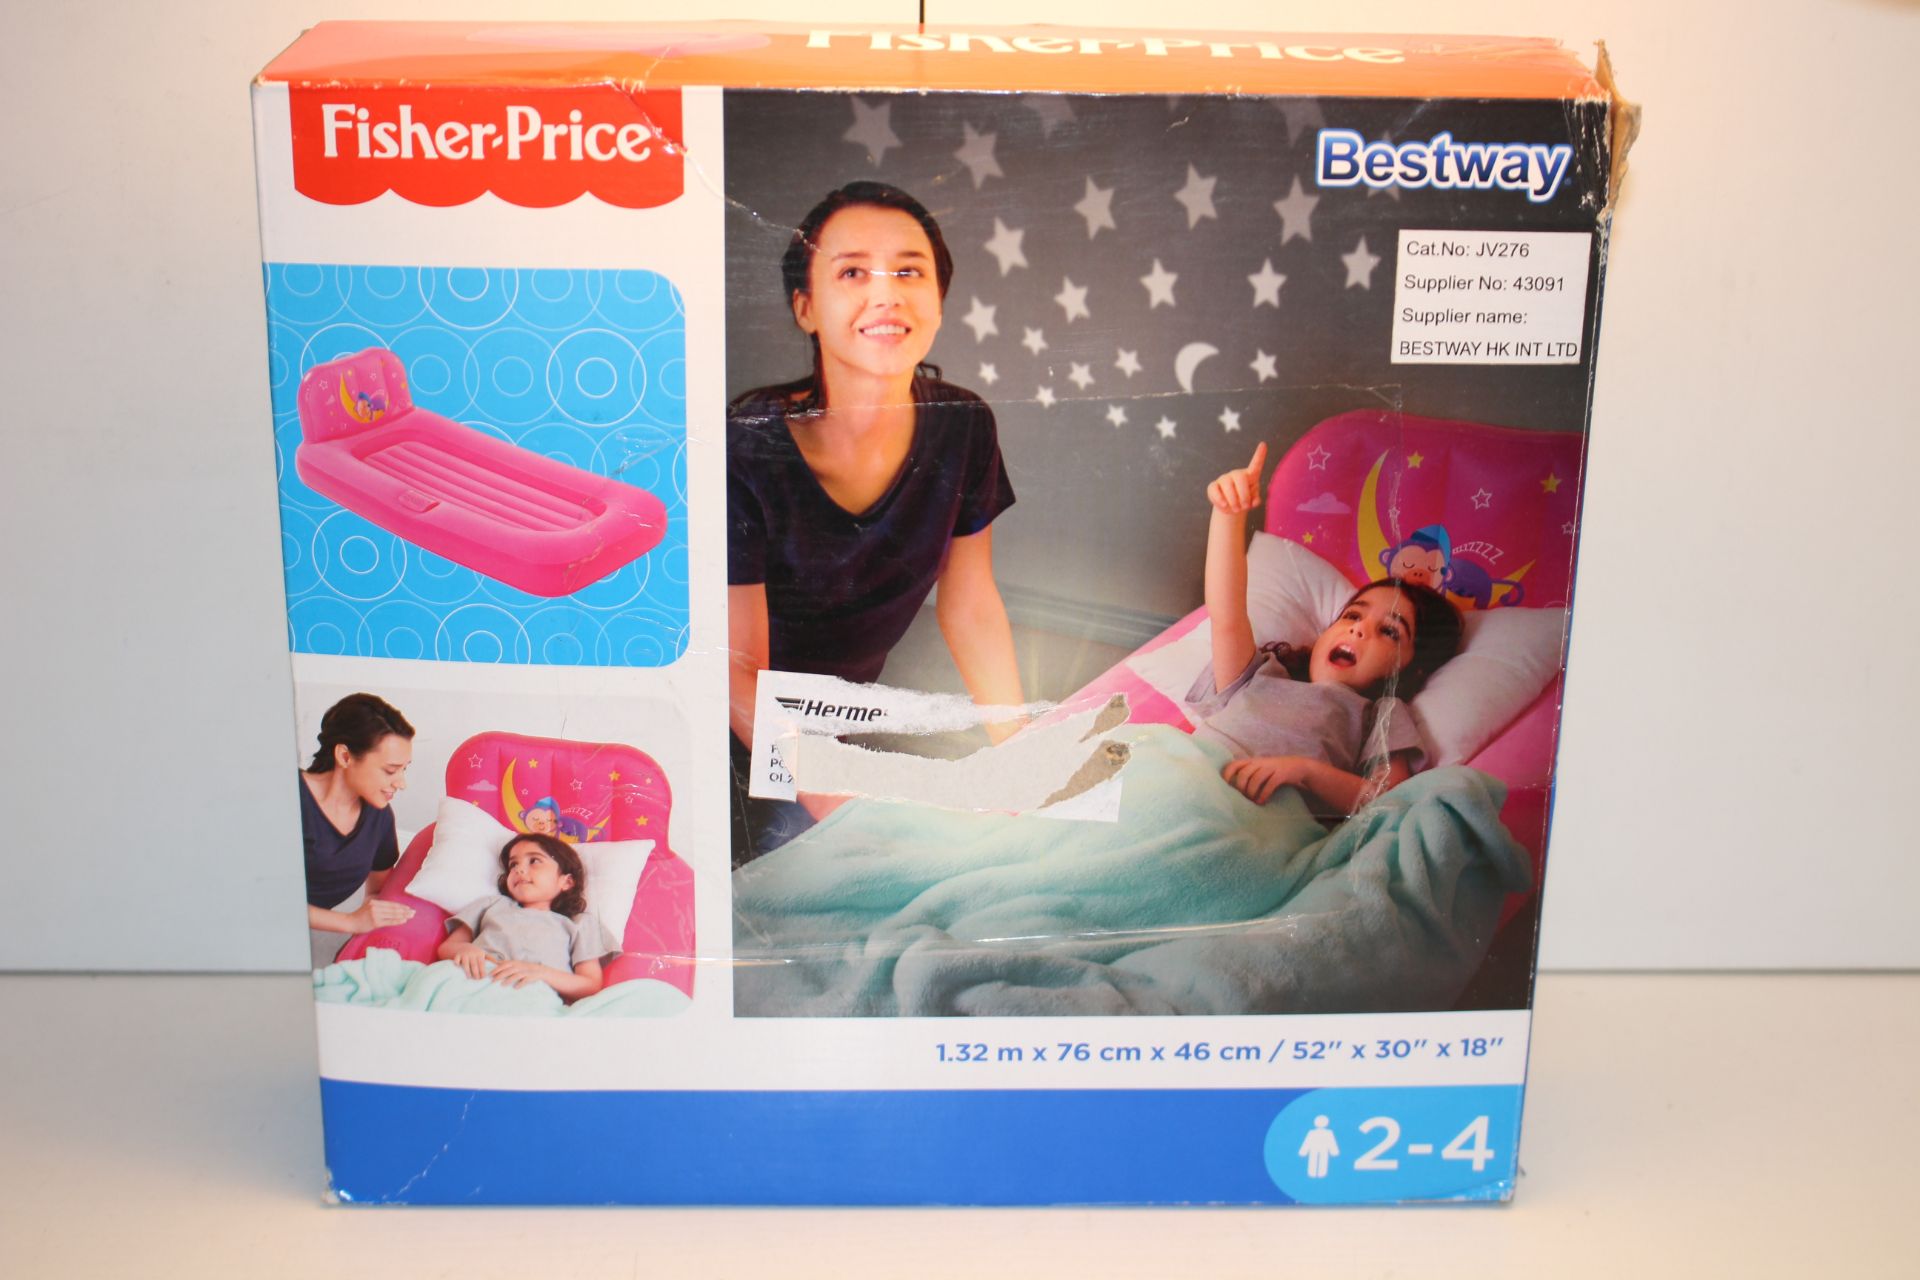 BOXED BESTWAY FISHER PRICE DREAM GLIMMERS COMFORT AIRBED RRP £19.99Condition ReportAppraisal